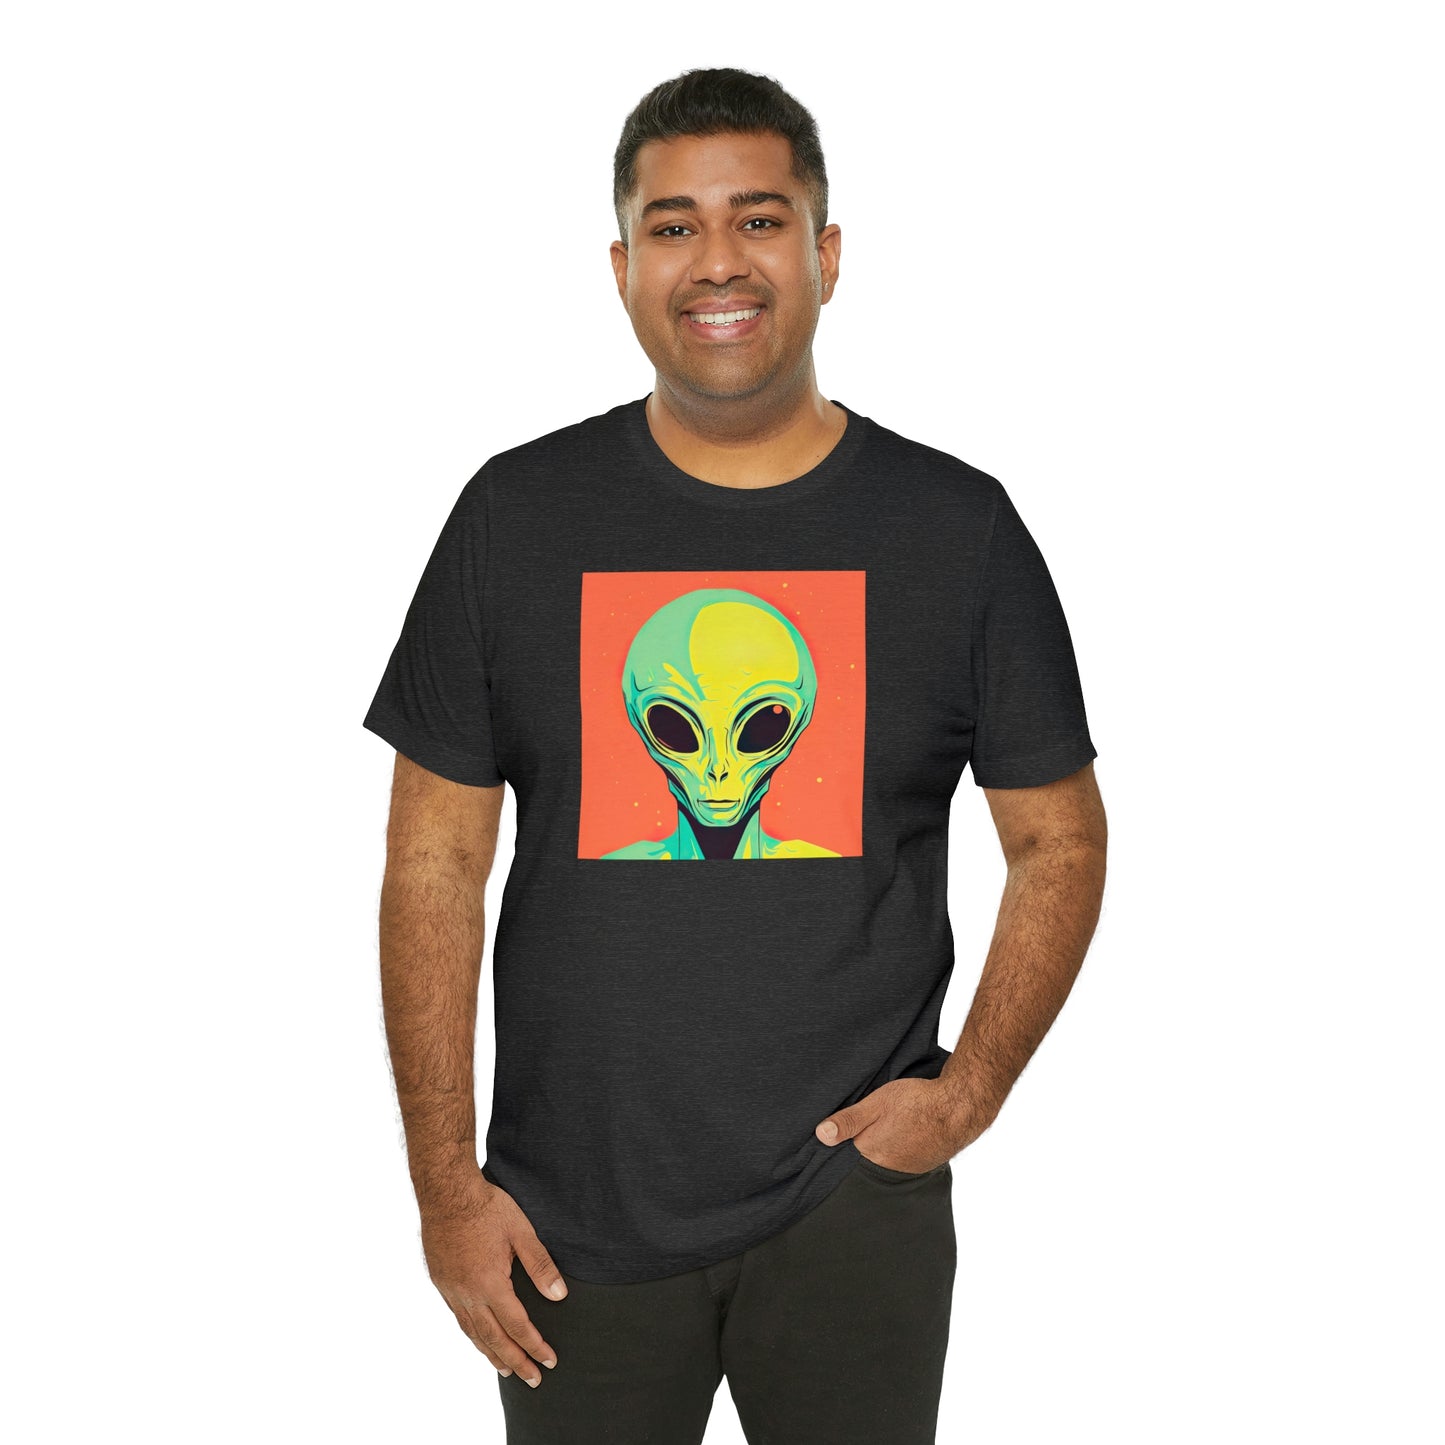 Neon Alien Selfie: Embrace the Edge of Two Worlds & Uncover Your Cosmic Identity